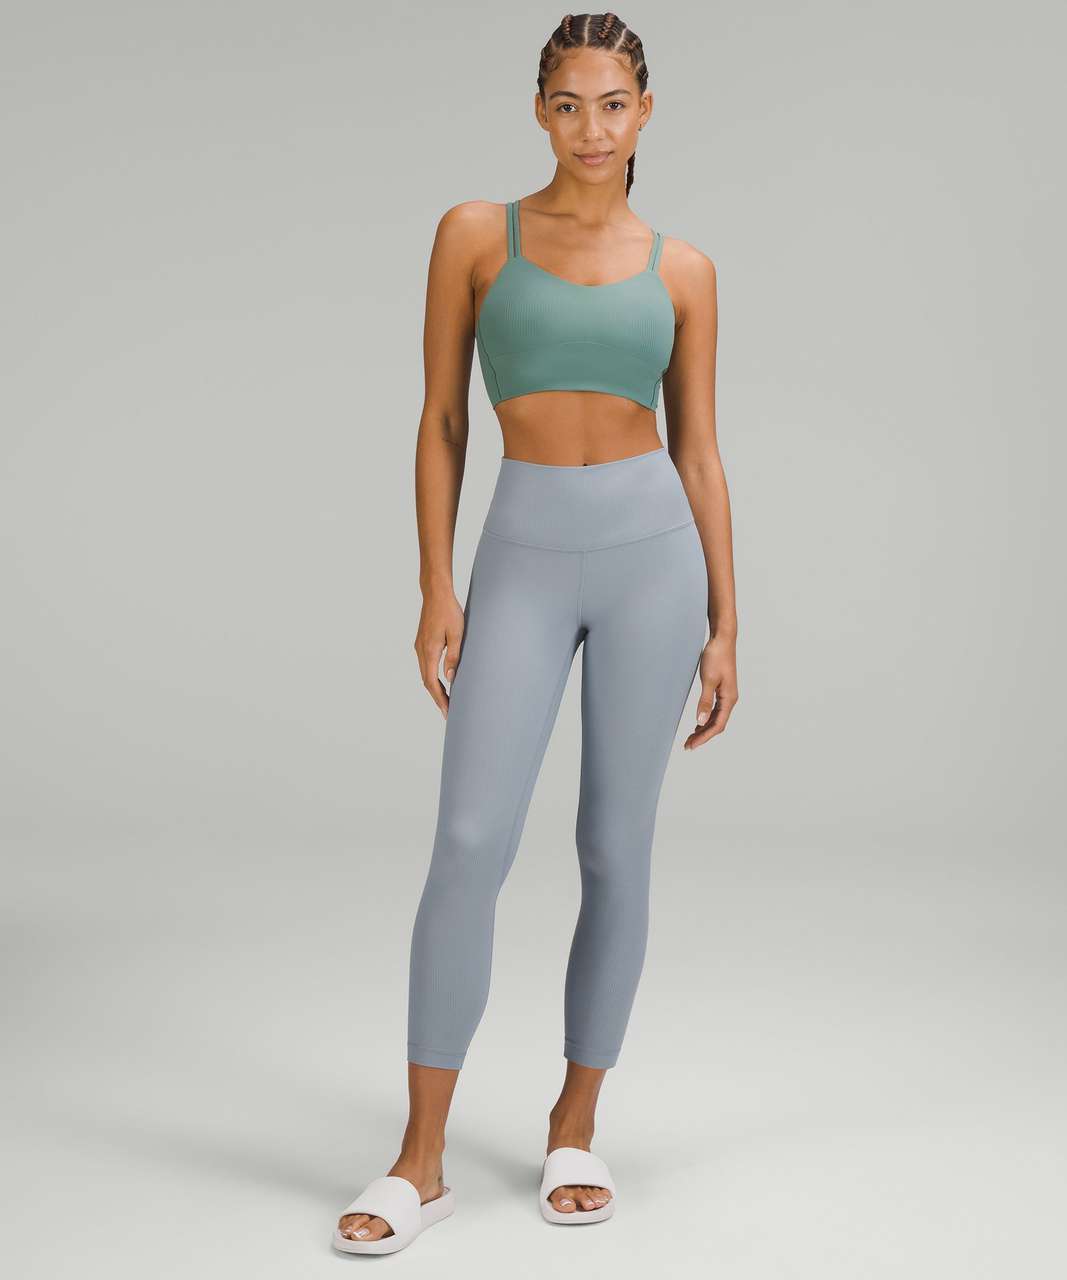 Chambray align tank (size 12) paired with Mini Herringbone aligns (size 10)  : r/lululemon